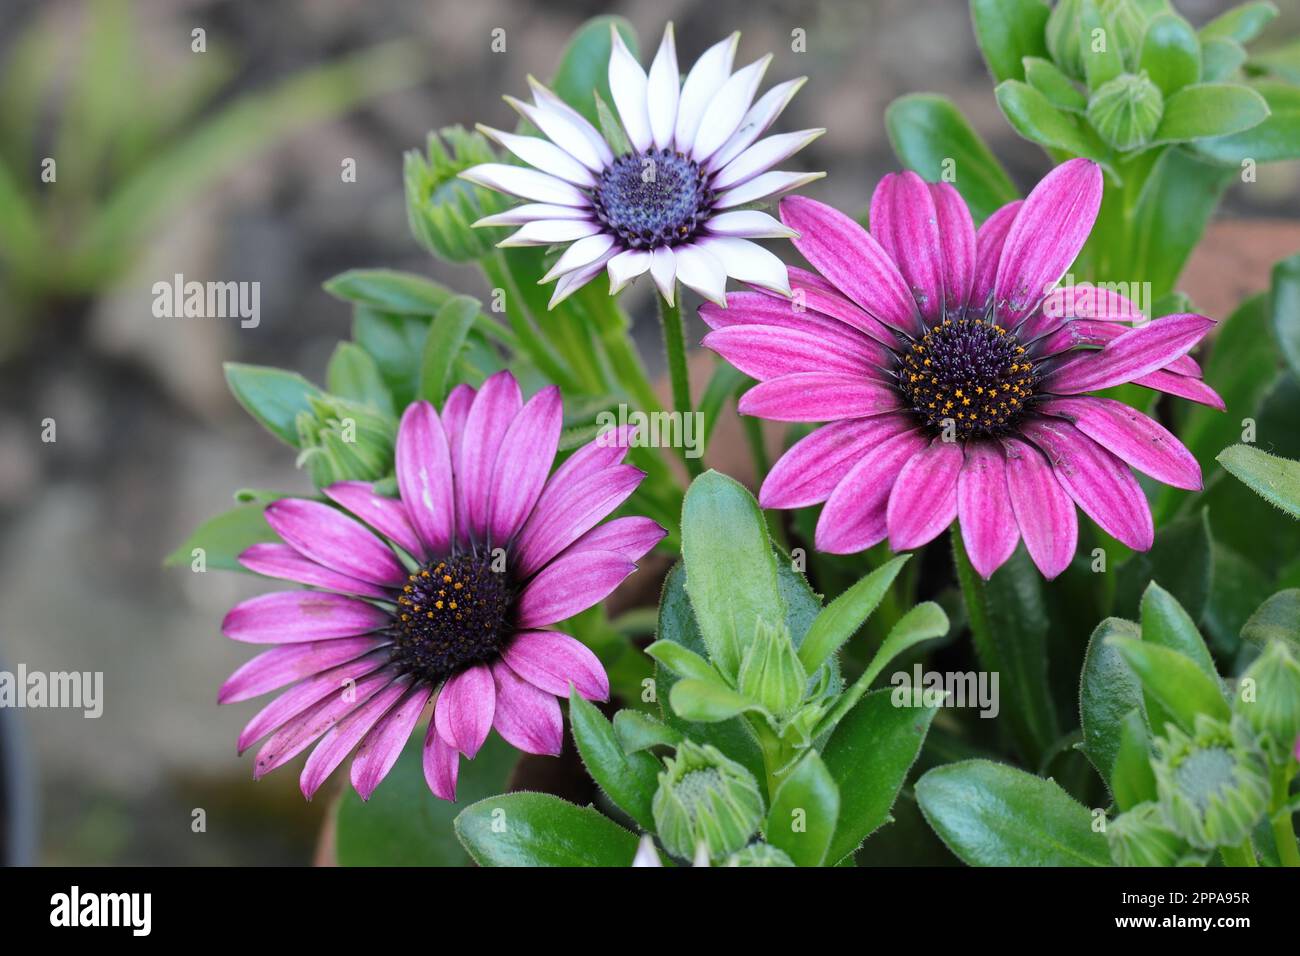 Close-up of beautiful purple and white african daisy flowers in a planter Stock Photo